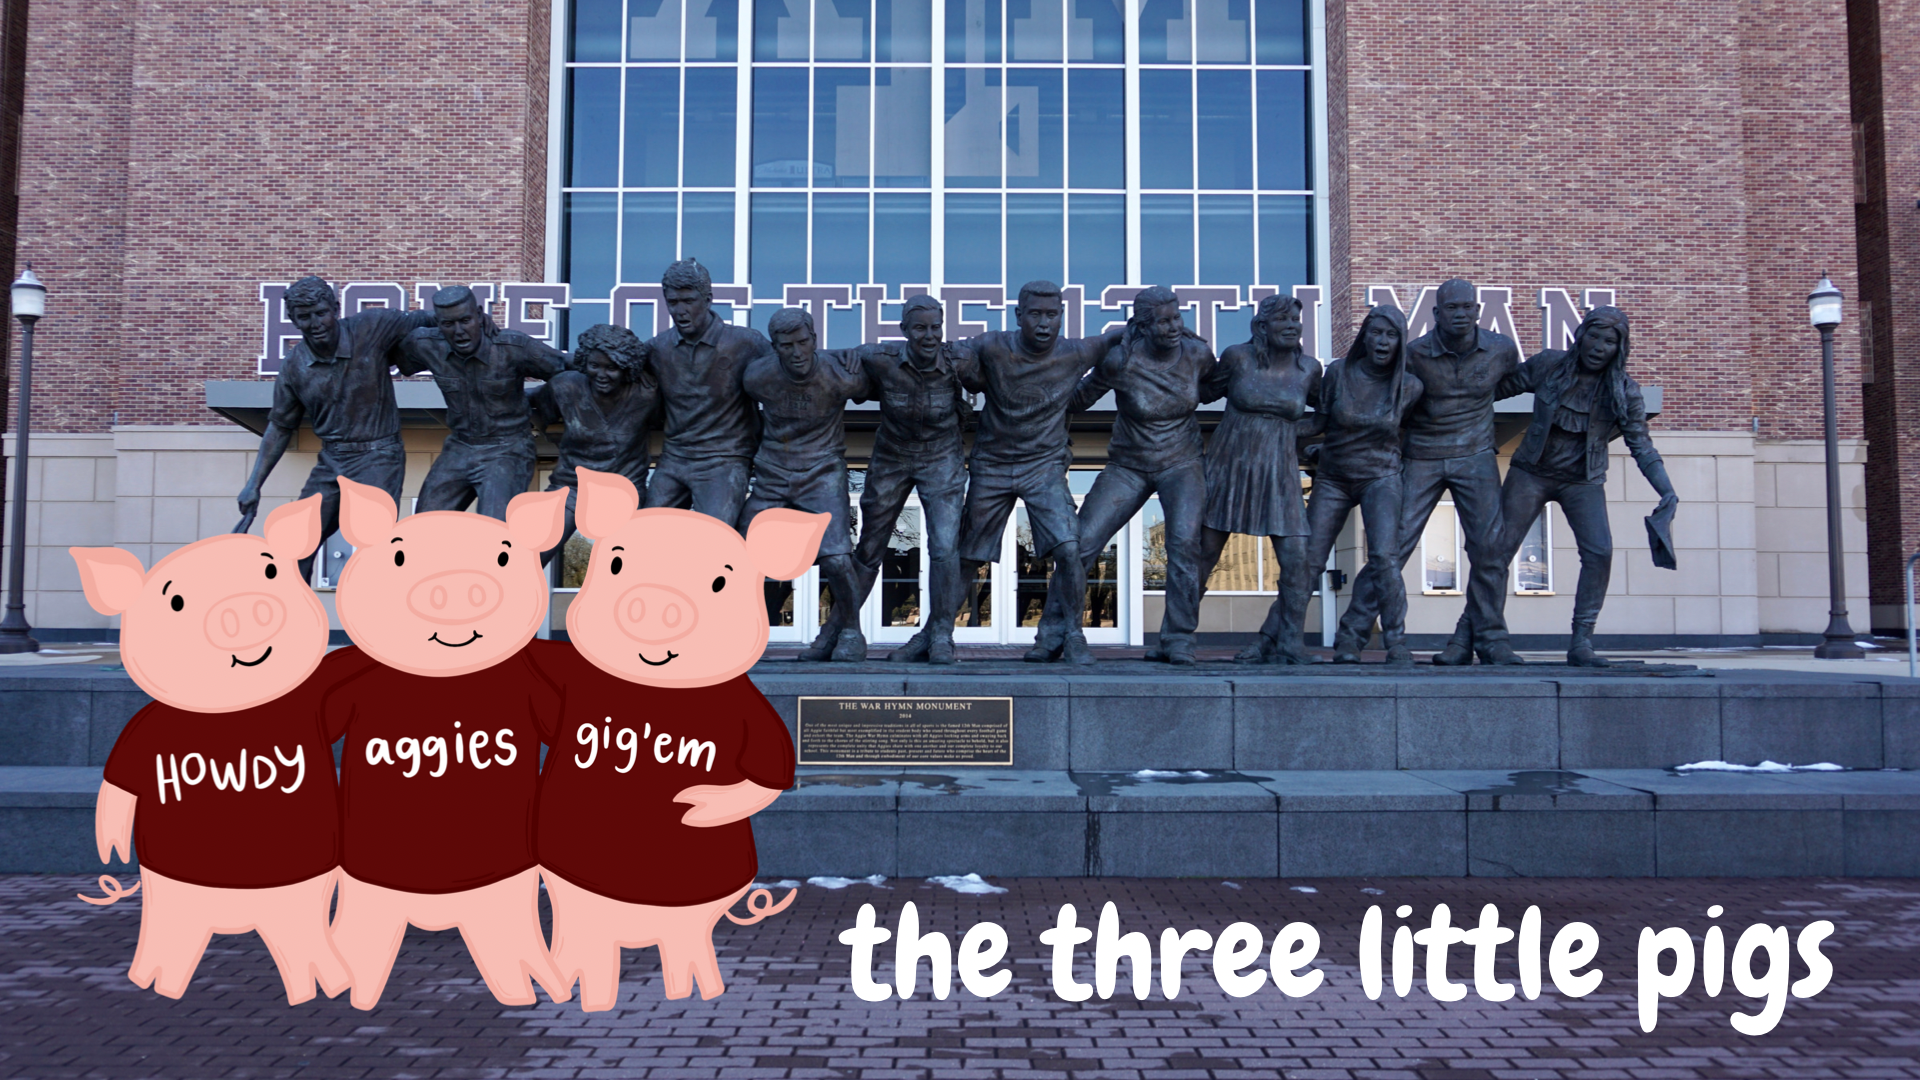 The three little pigs sway and sing the Aggie War Hymn in front of the Aggie War Hymn statue at Kyle Field.